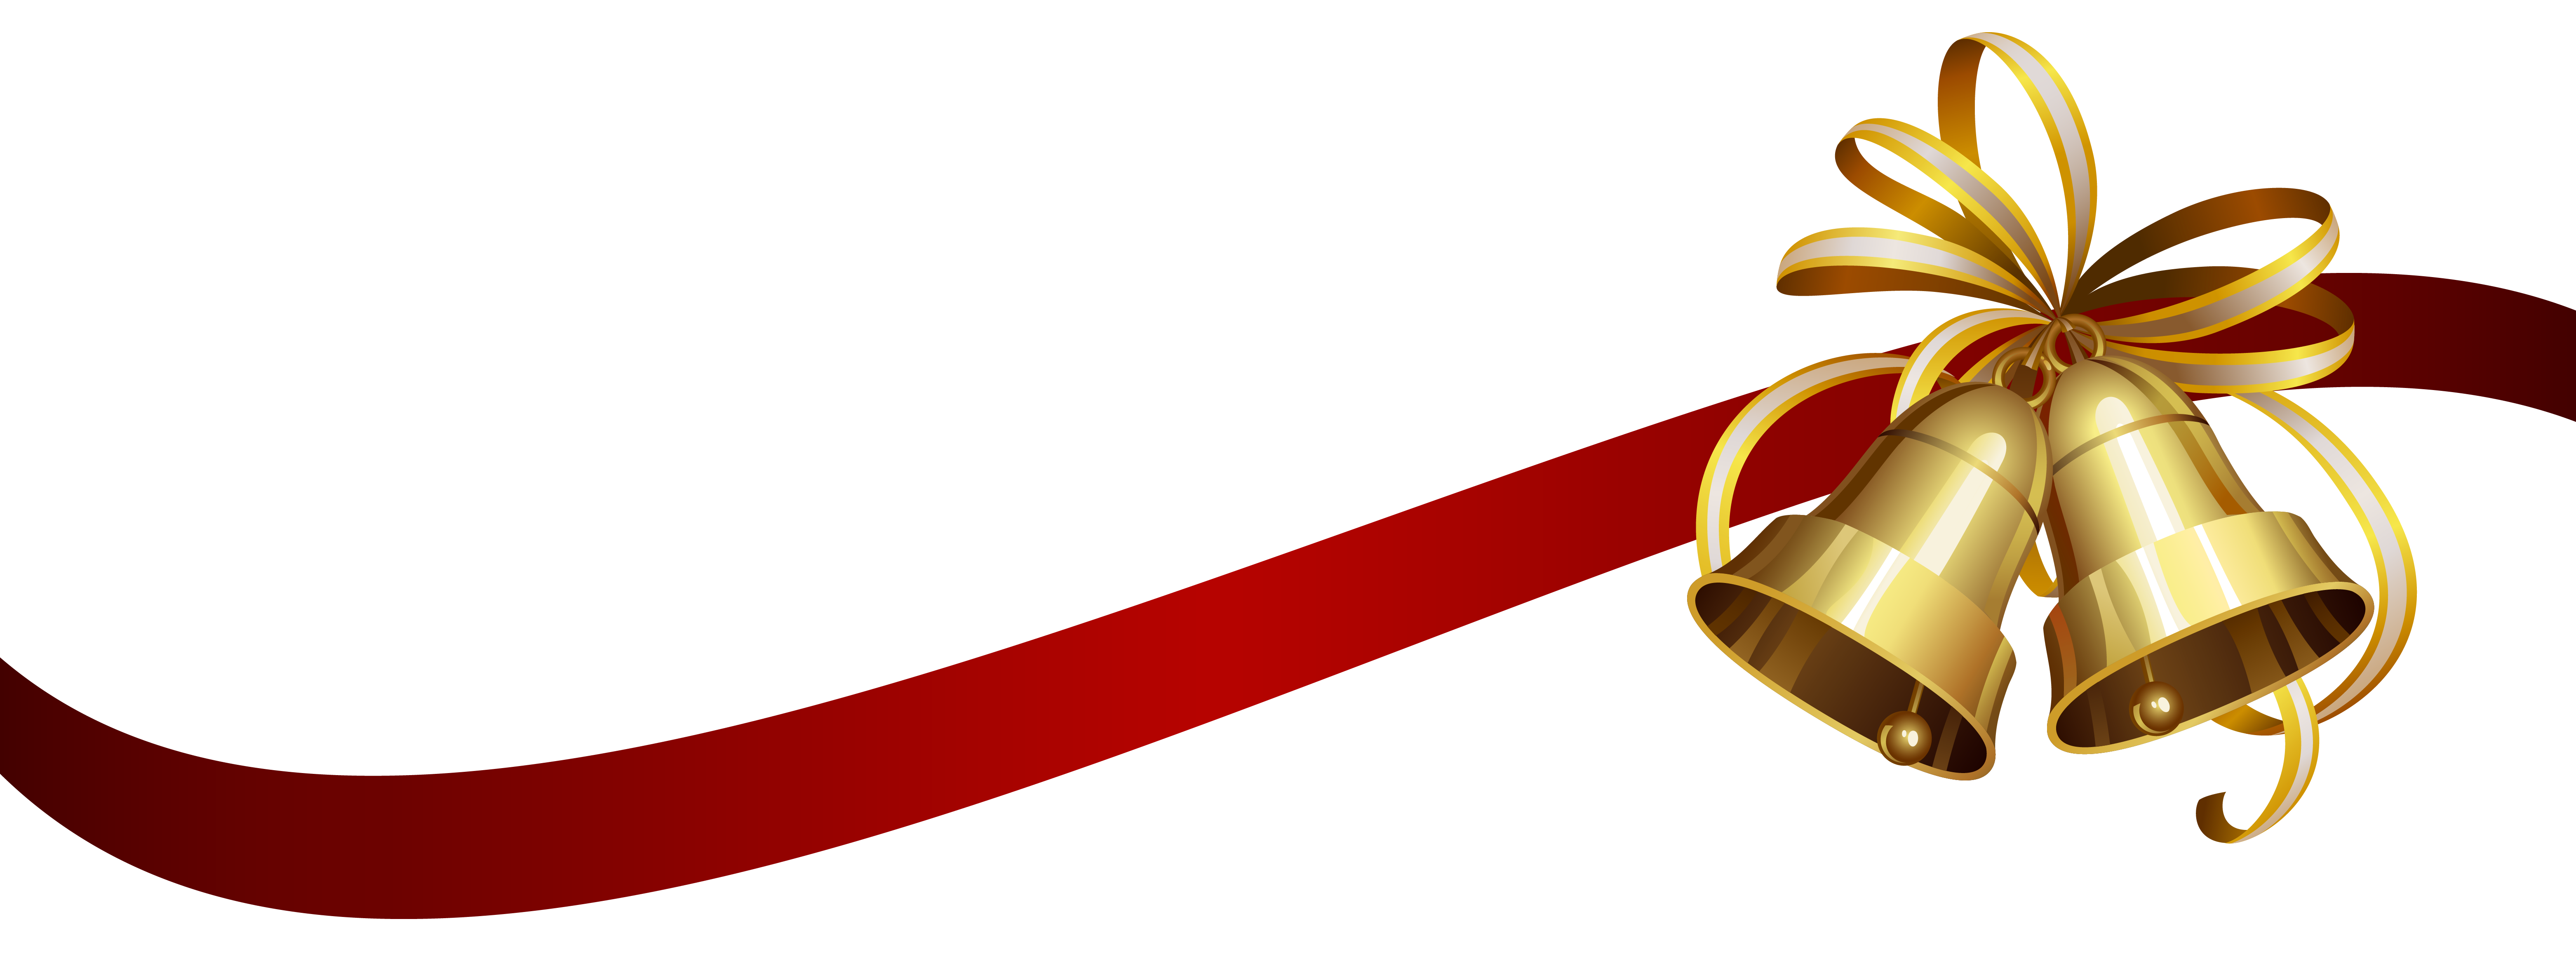 Christmas Ribbon PNG Transparent Images | PNG All